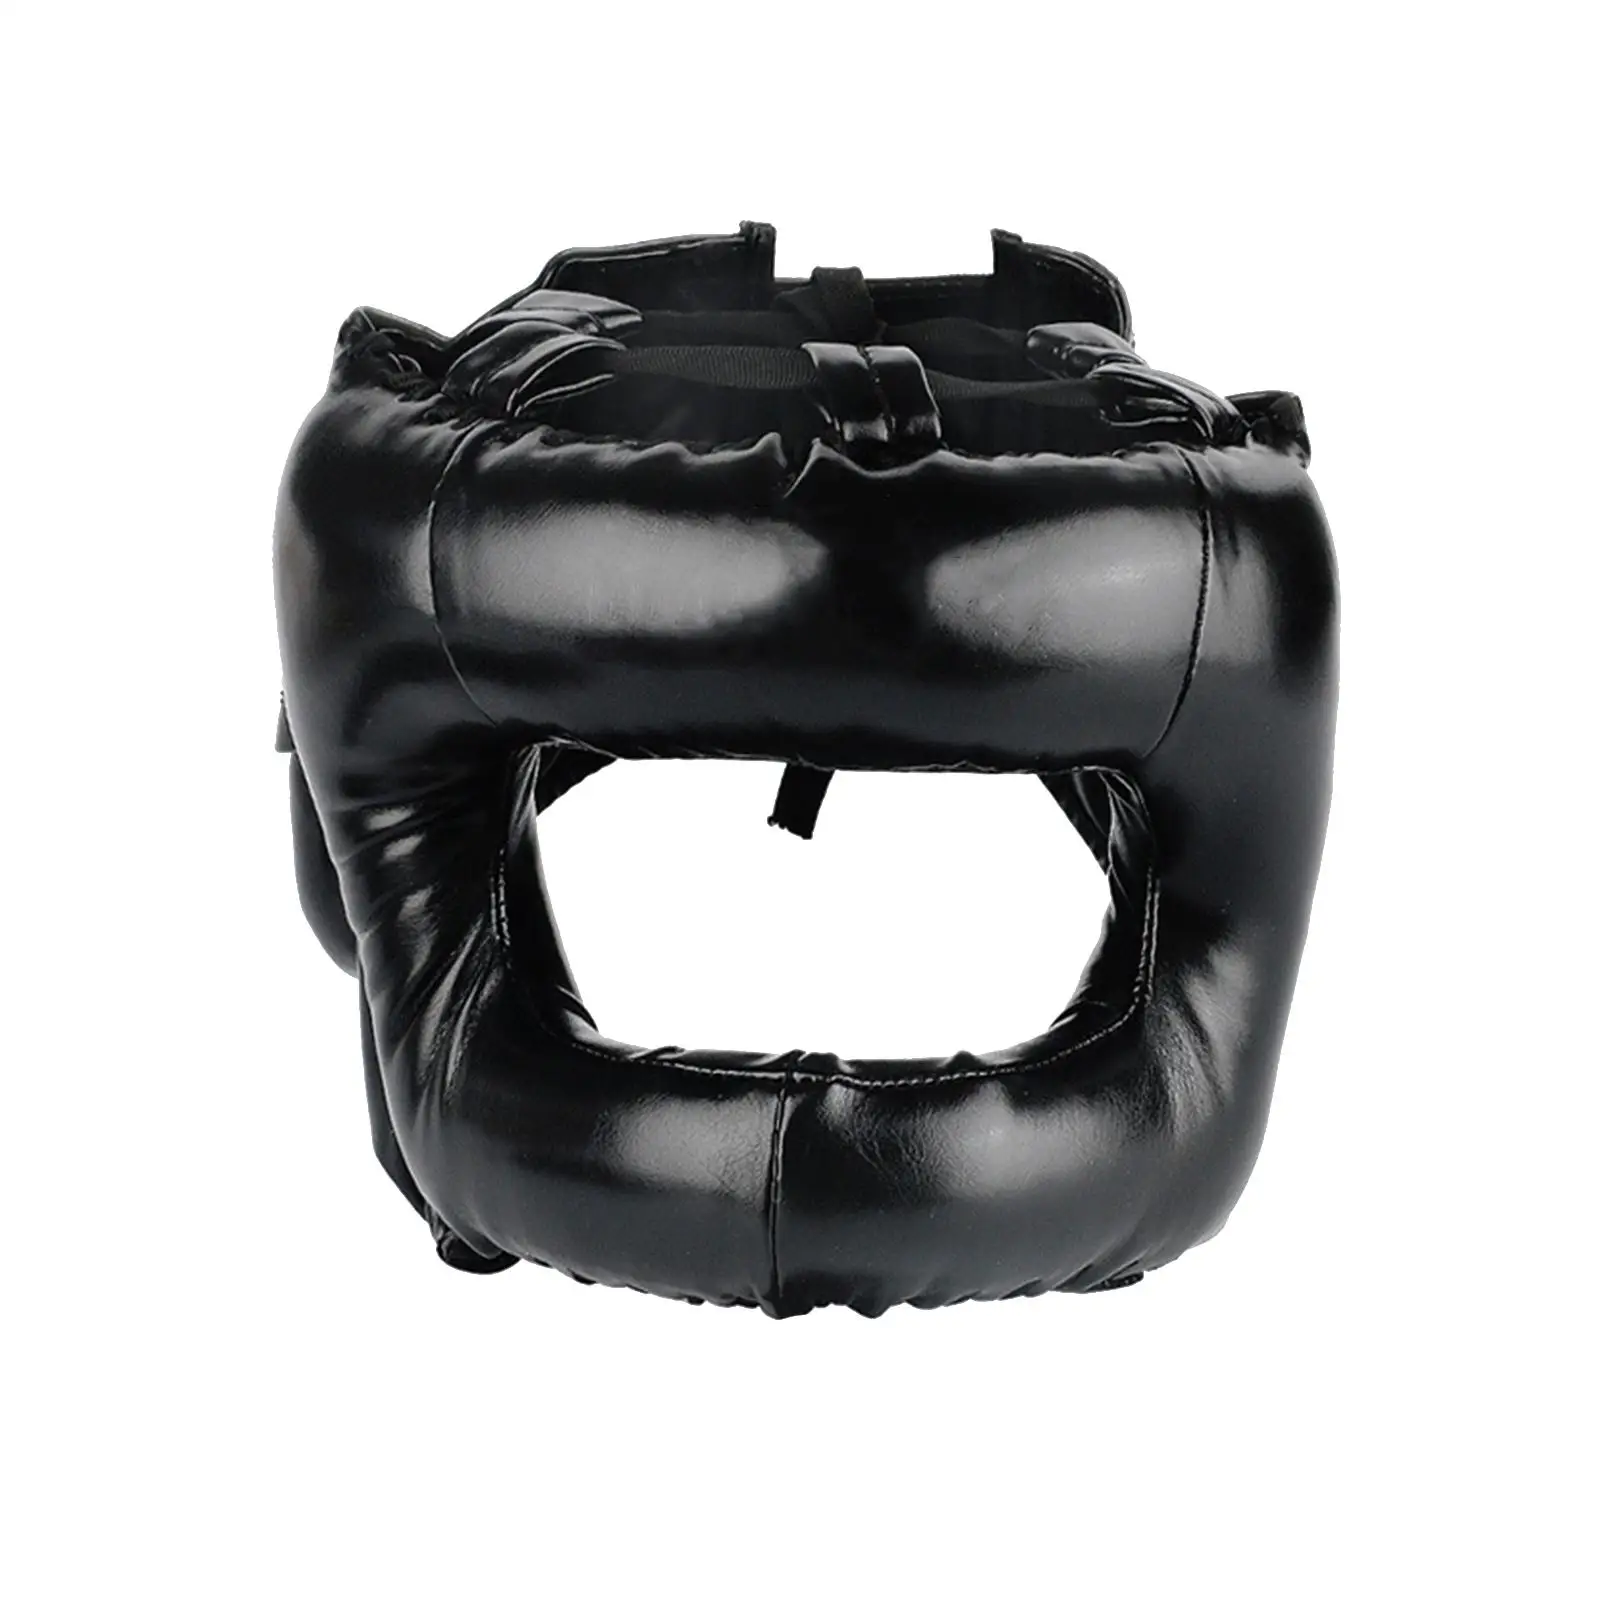 Boxing Headgear Ventilated Adjustable Padded Training Durable Unisex Face Shield for Sanda Sparring Kickboxing Karate Supplies